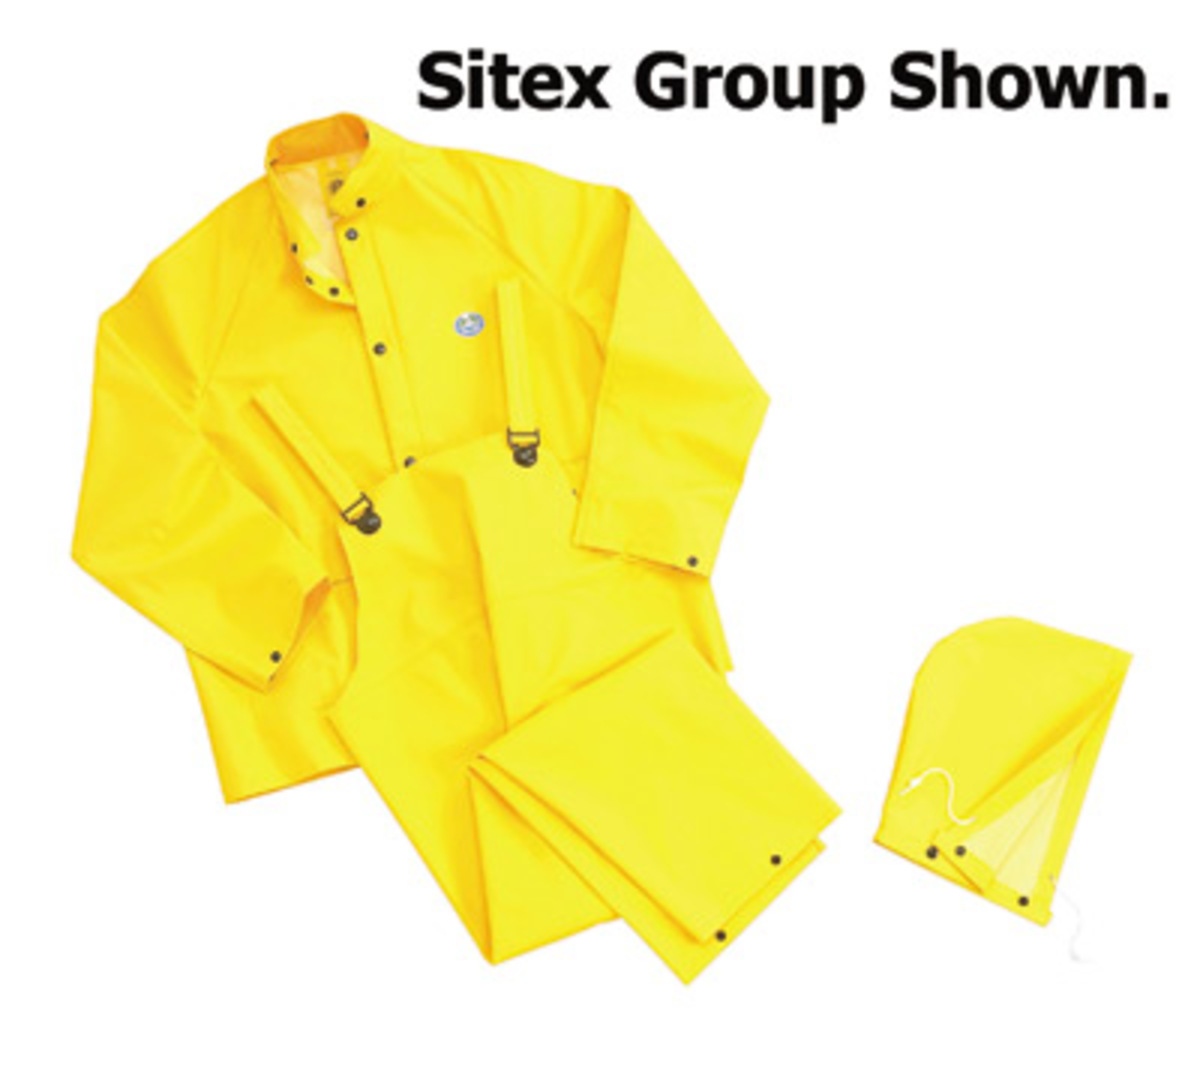 Dunlop® Protective Footwear 4X Yellow Sitex Polyester/PVC Rain Suit With Detachable Hood